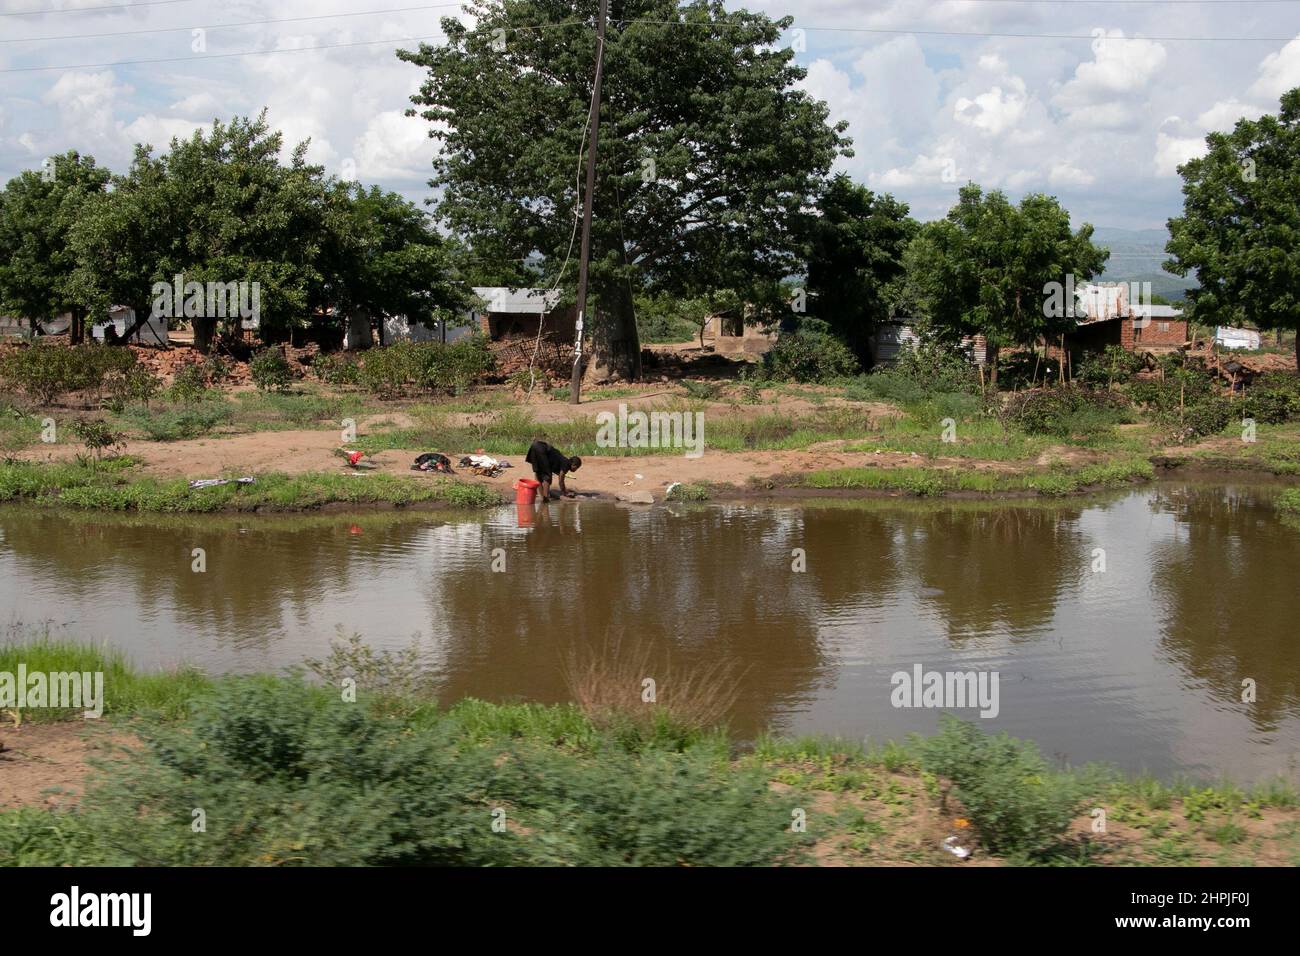 A young girl is seen using unclean flood water in Chikwawa district in Malawi. The district was hit by Tropical Cyclone Ana and some areas are still under water as it has not dried up. Malawi. Stock Photo